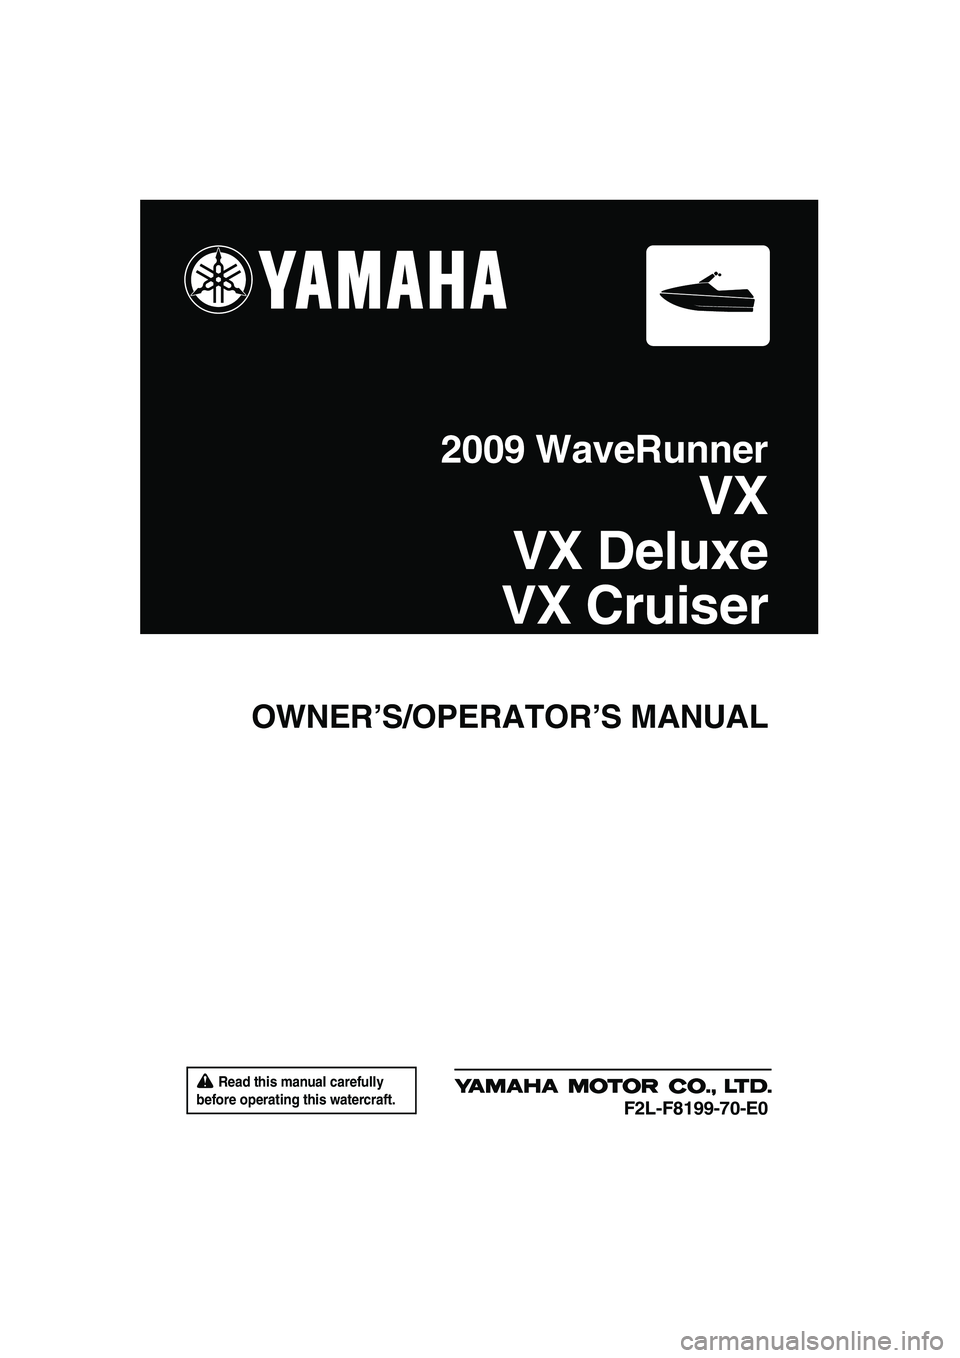 YAMAHA VX 2009  Owners Manual  Read this manual carefully 
before operating this watercraft.
OWNER’S/OPERATOR’S MANUAL
2009 WaveRunner
VX
VX Deluxe
VX Cruiser
F2L-F8199-70-E0
UF2L70E0.book  Page 1  Thursday, June 19, 2008  8:3